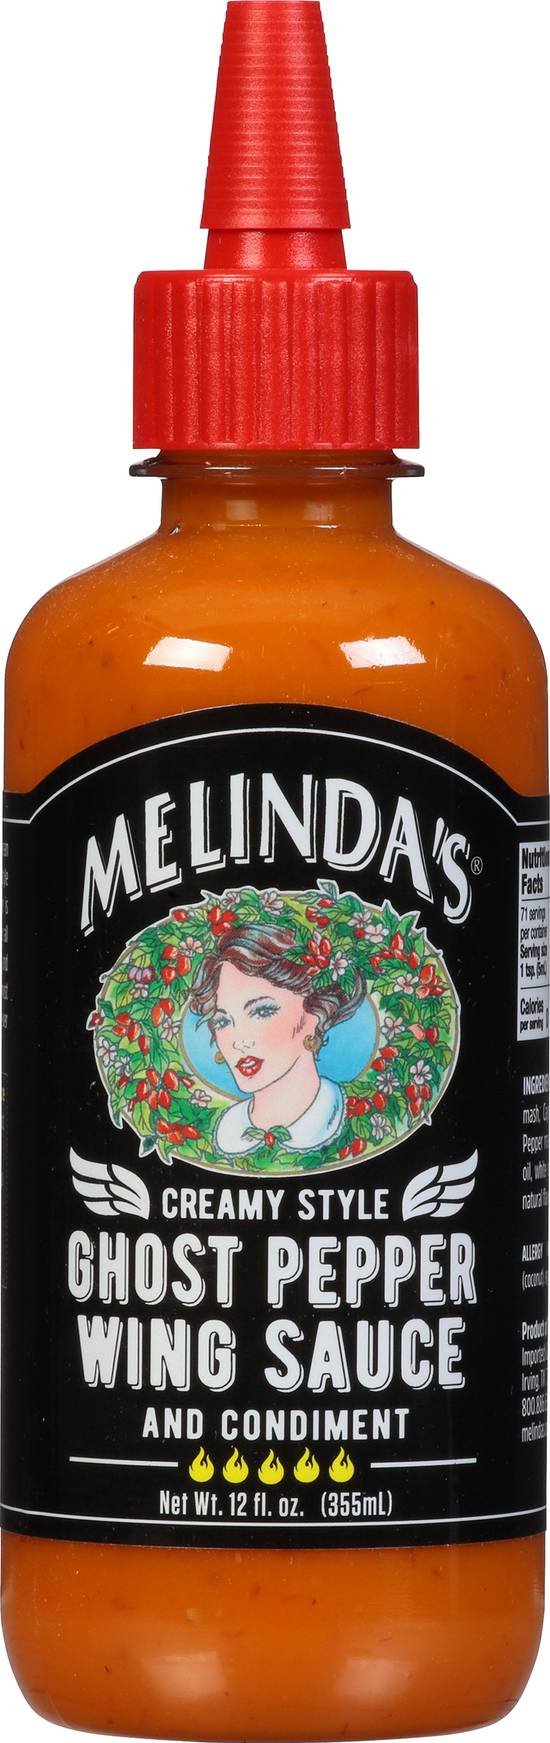 Melinda's Creamy Style Ghost Pepper Wing Sauce and Condiment